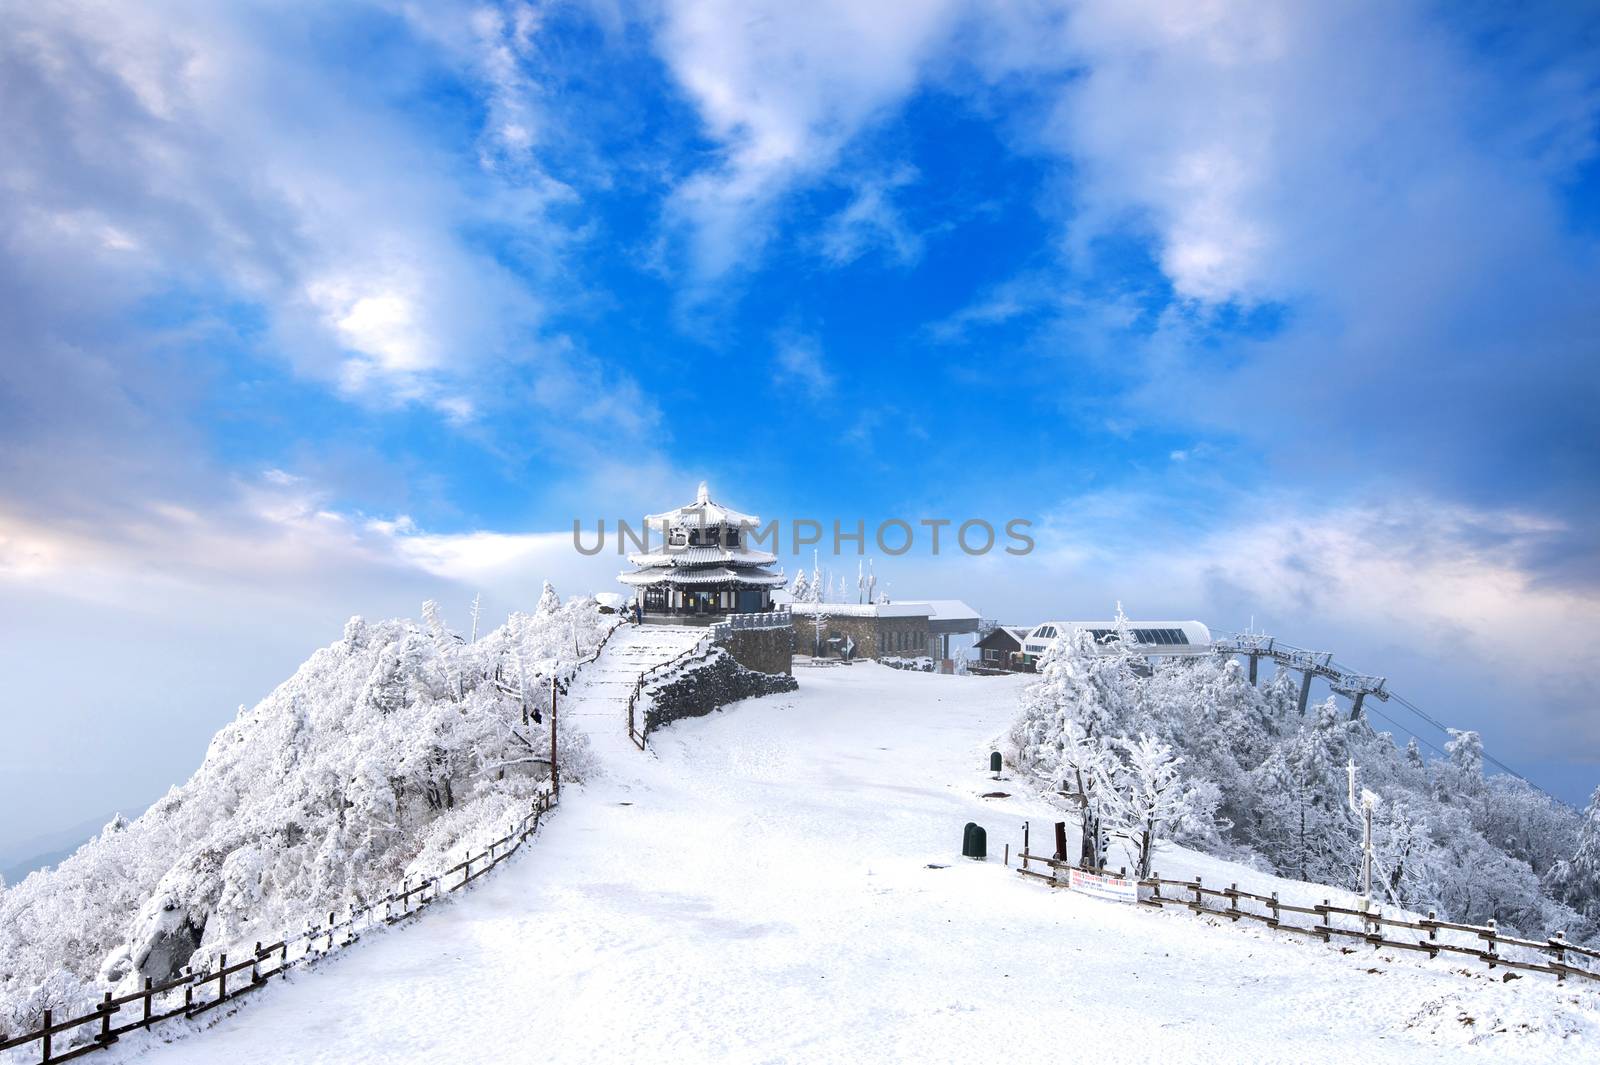 Deogyusan mountains is covered by snow and morning fog in winter by gutarphotoghaphy